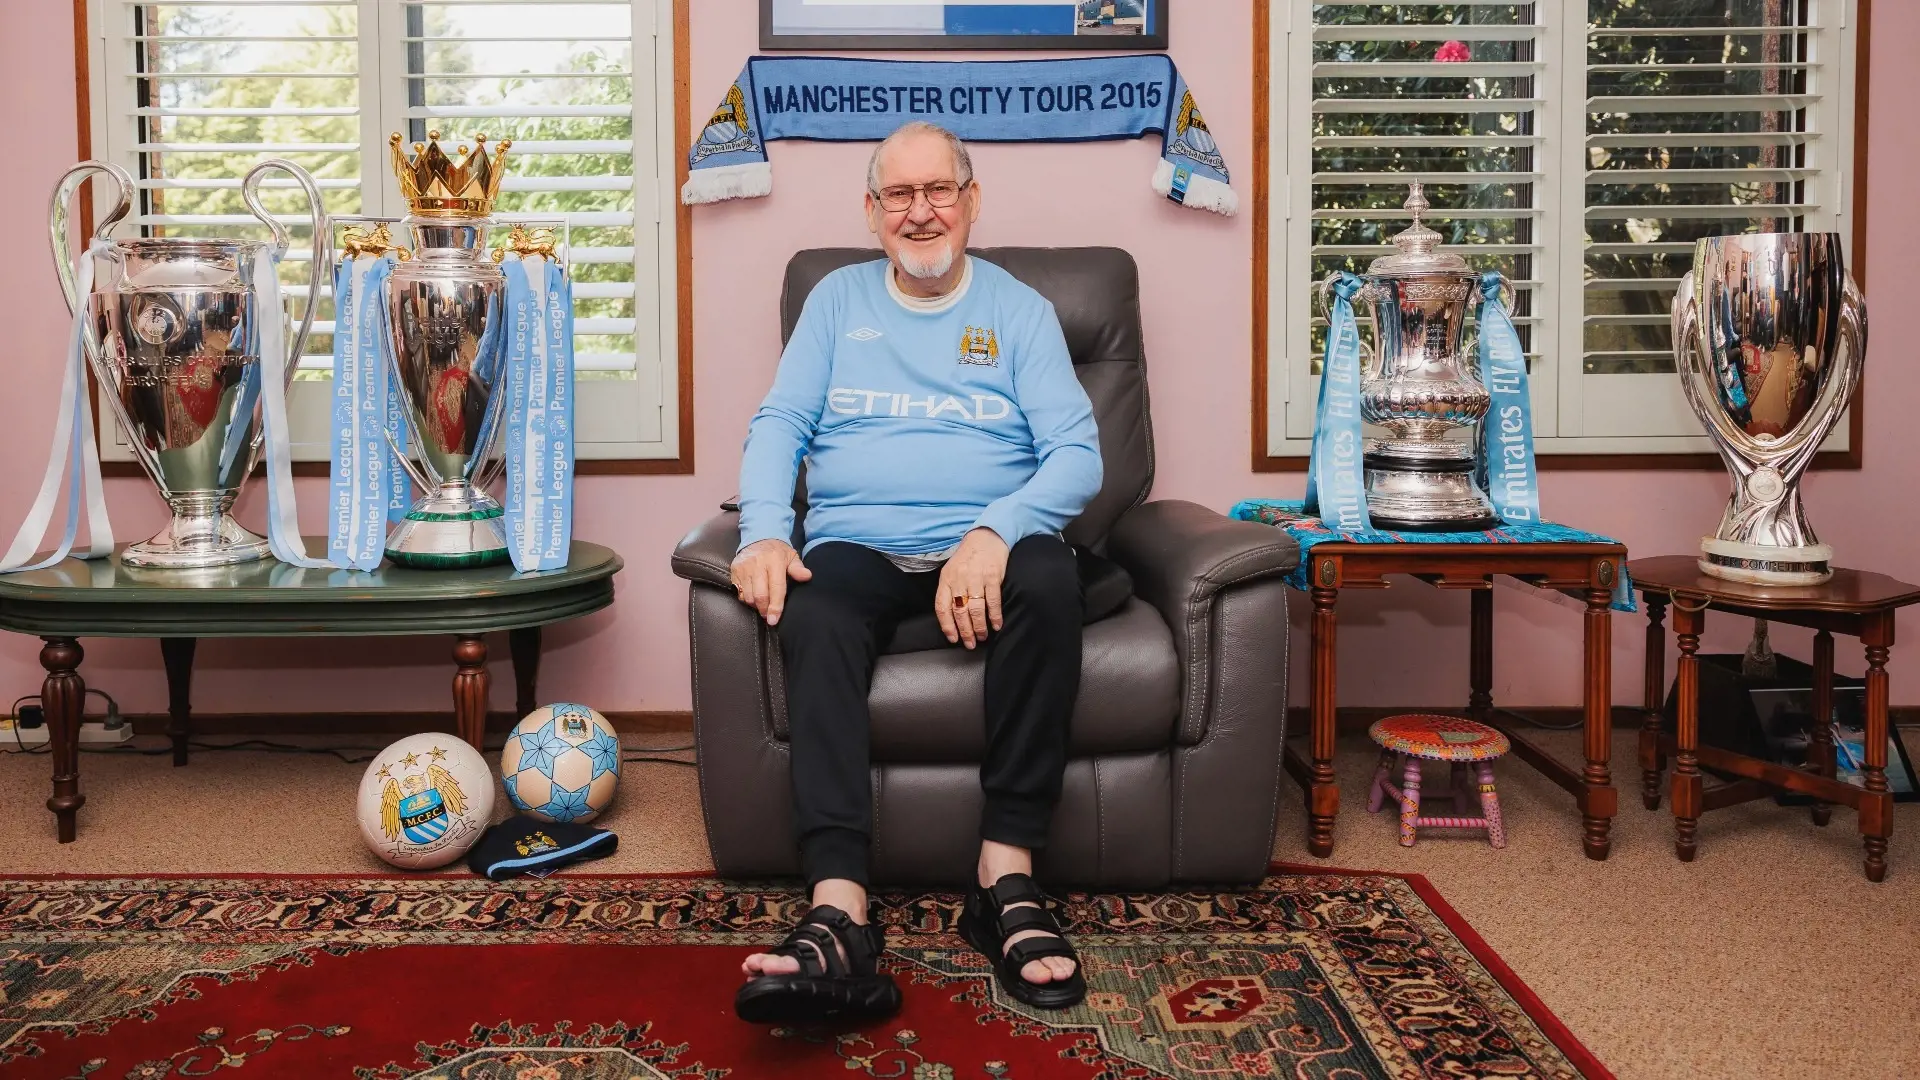 Terminally ill Manchester City fan surprised with treble trophies